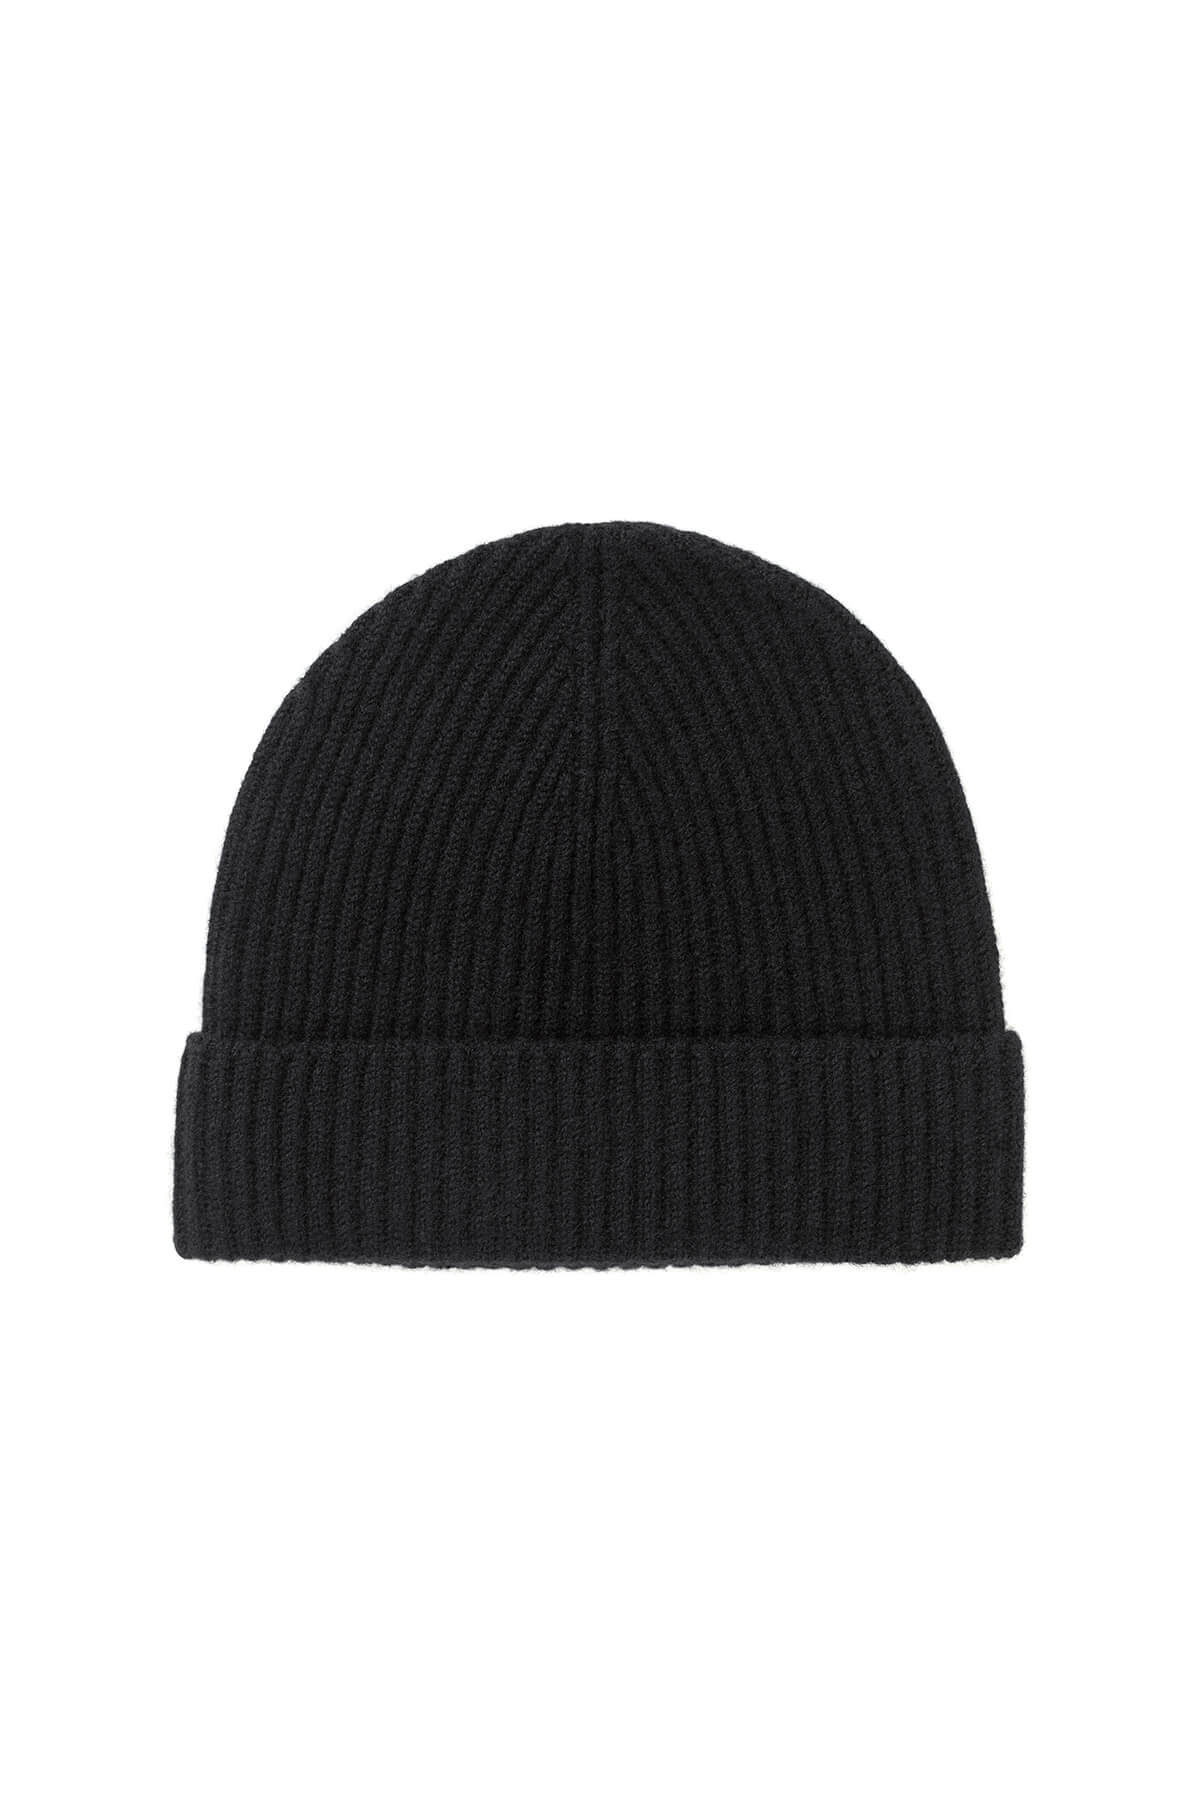 Johnstons of Elgin’s Ribbed Cashmere Beanie Giftset in Black on a white background AW23GIFTSET6A